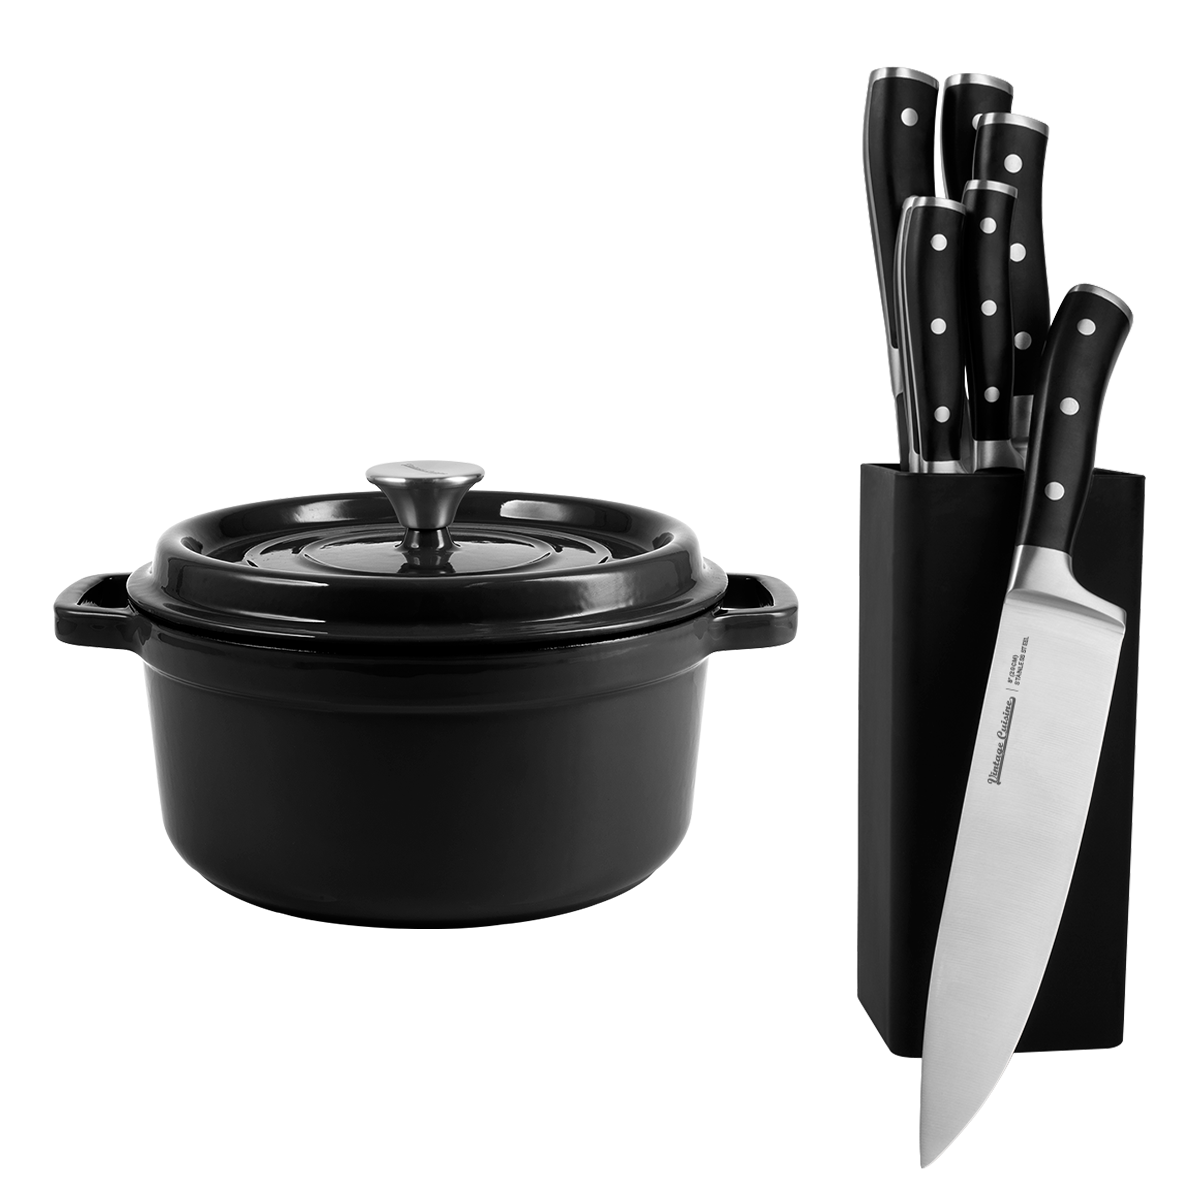 Chef's set: set of 7 kitchen knives with stand and cast iron pot with lid 4.3l